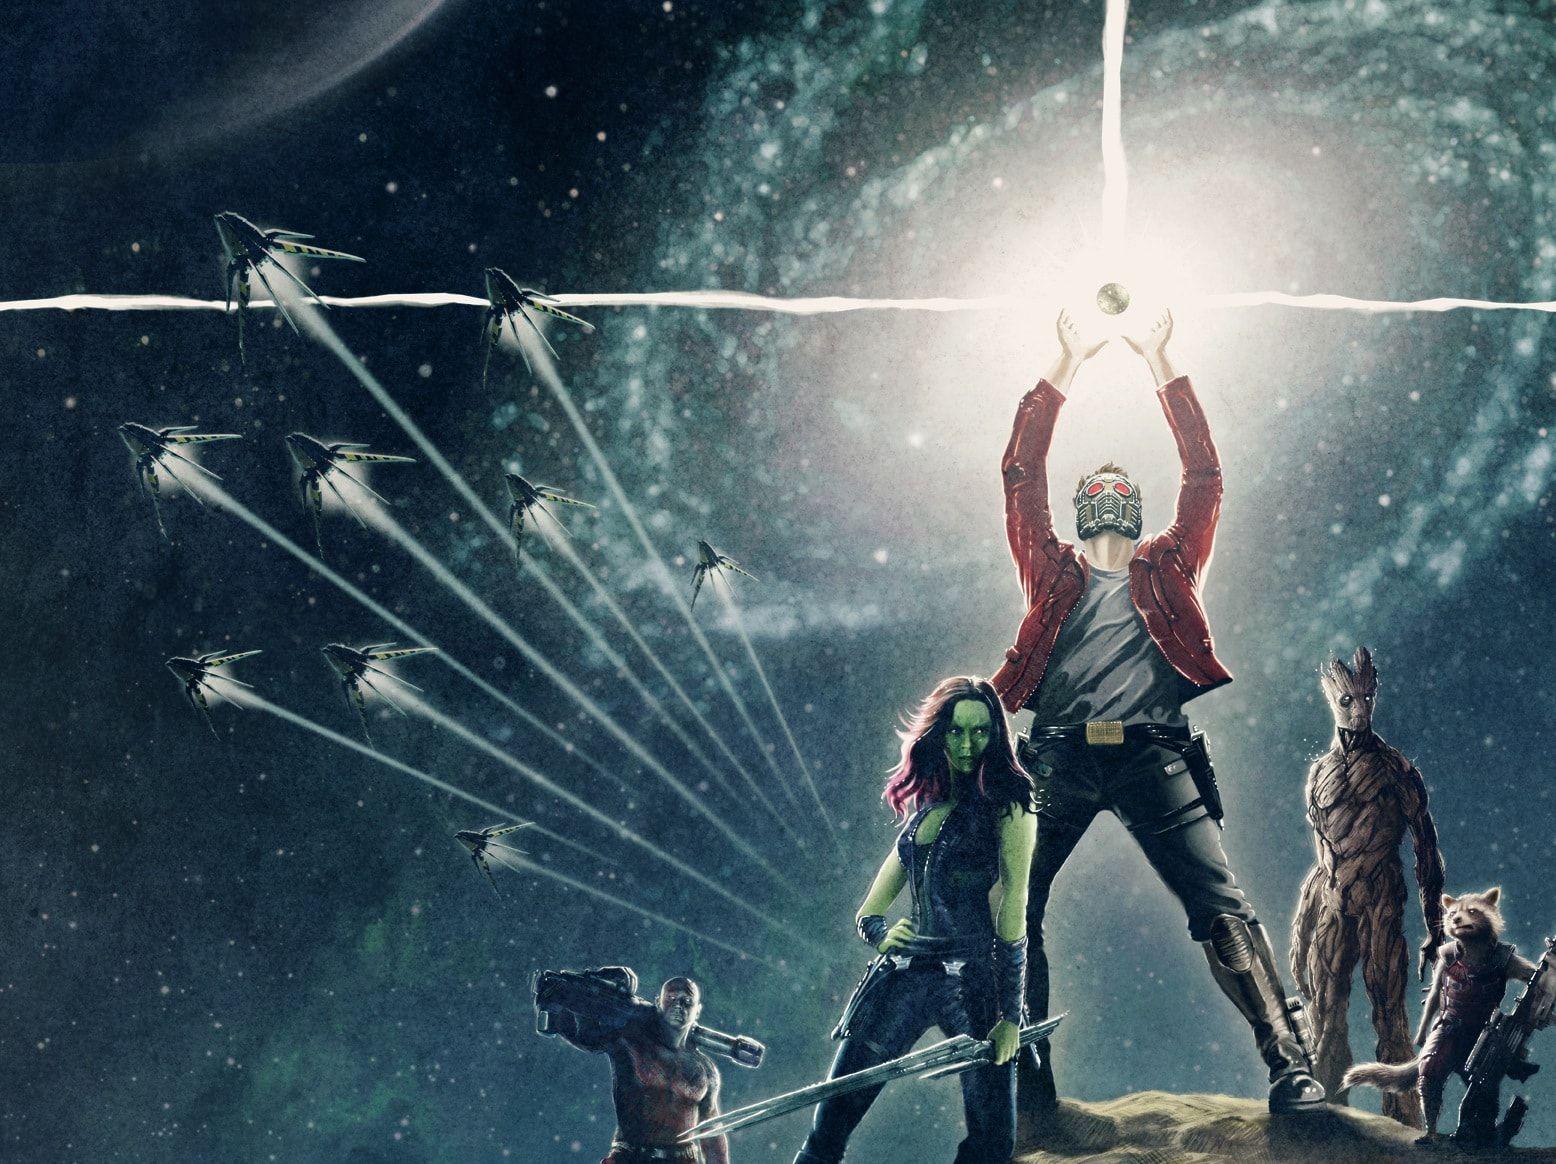 Guardians Of The Galaxy Wallpaper For